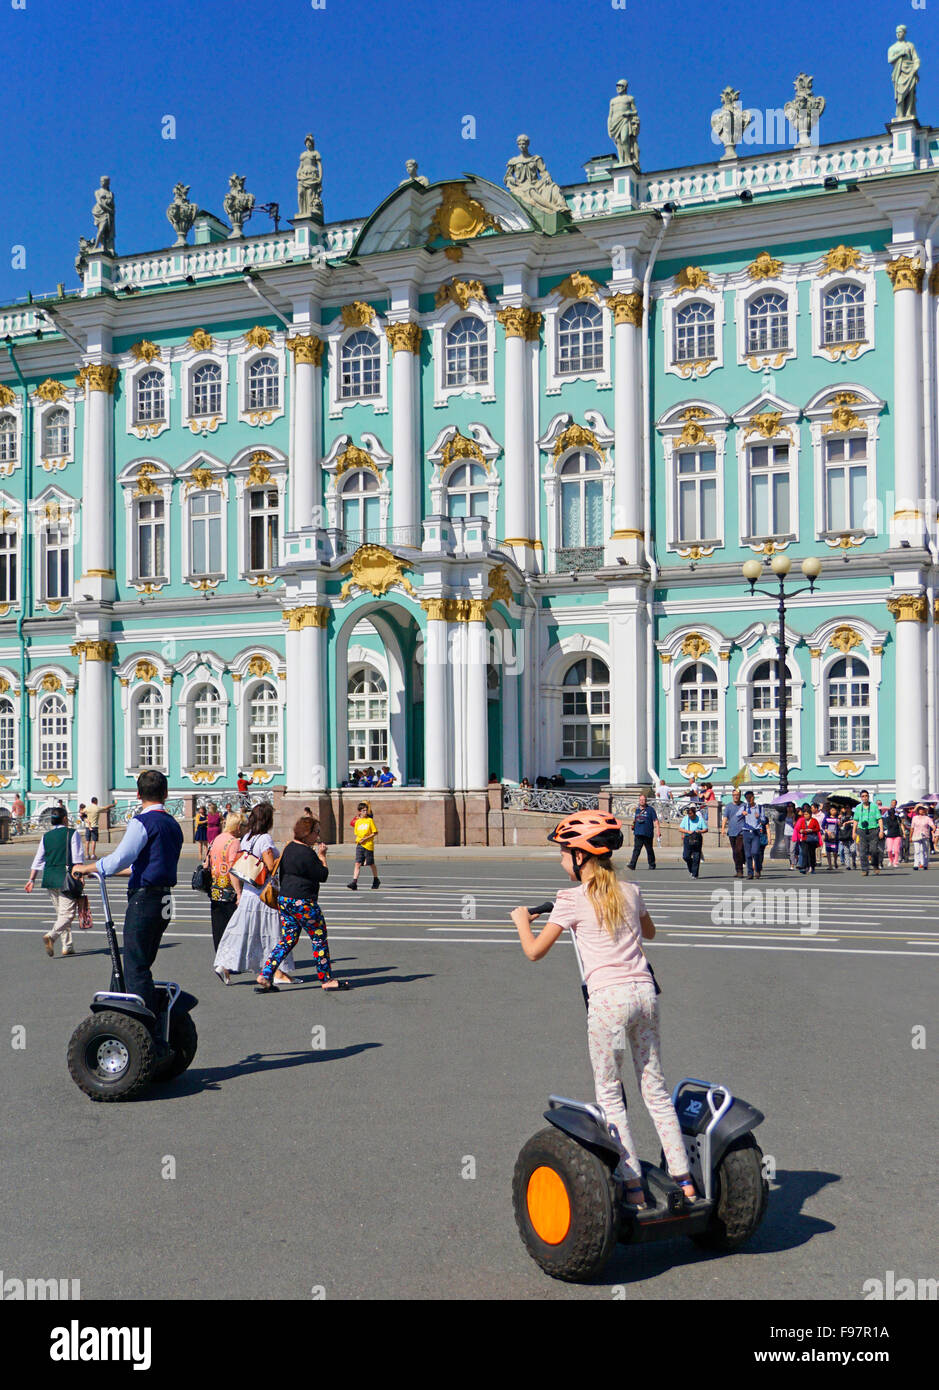 Tourists on Segways at The State Hermitage Museum's Winter Palace in St. Petersburg, Russia. Stock Photo